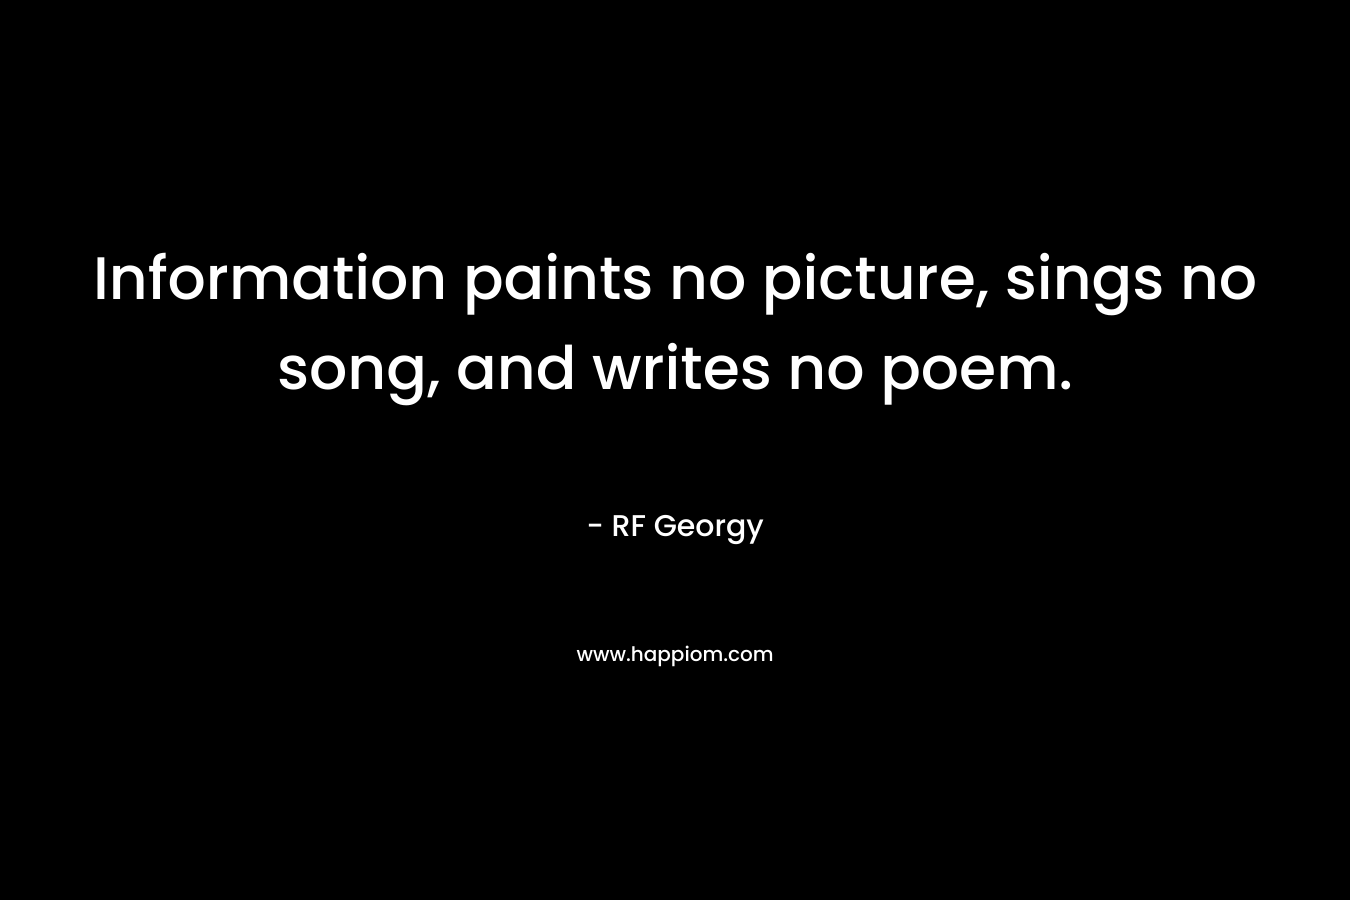 Information paints no picture, sings no song, and writes no poem. – RF Georgy